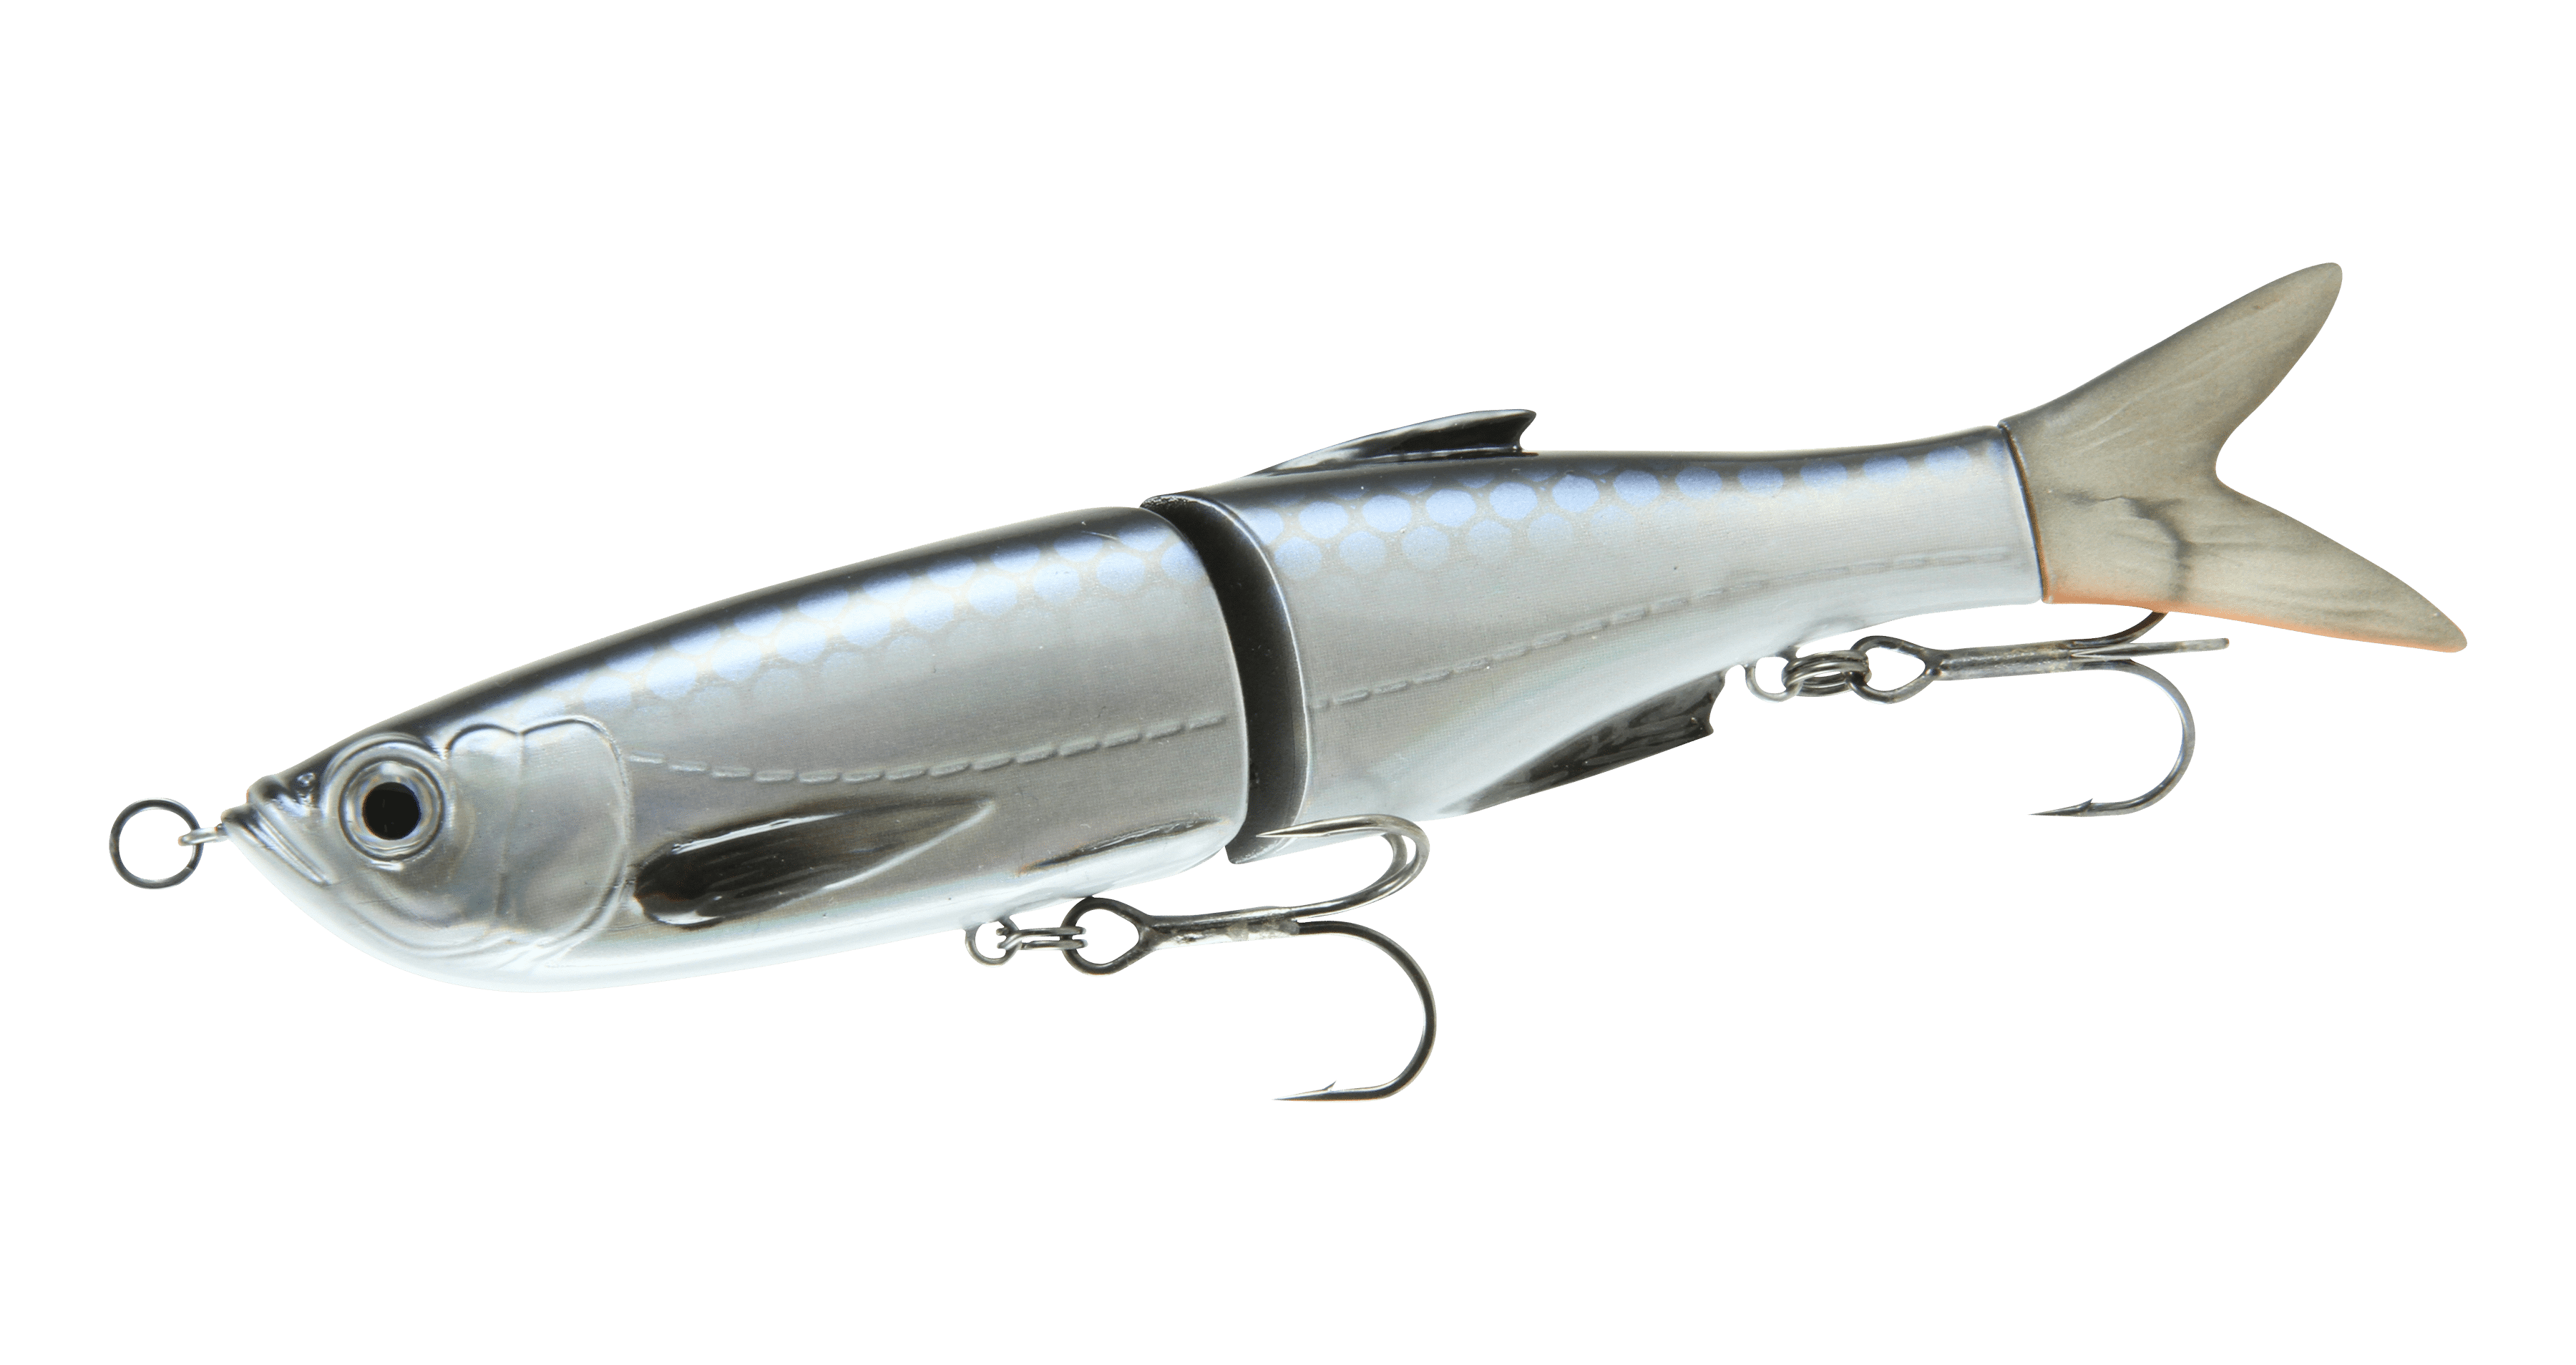 Slow Sinking Lure Savage Gear Jointed Glide Swimmer